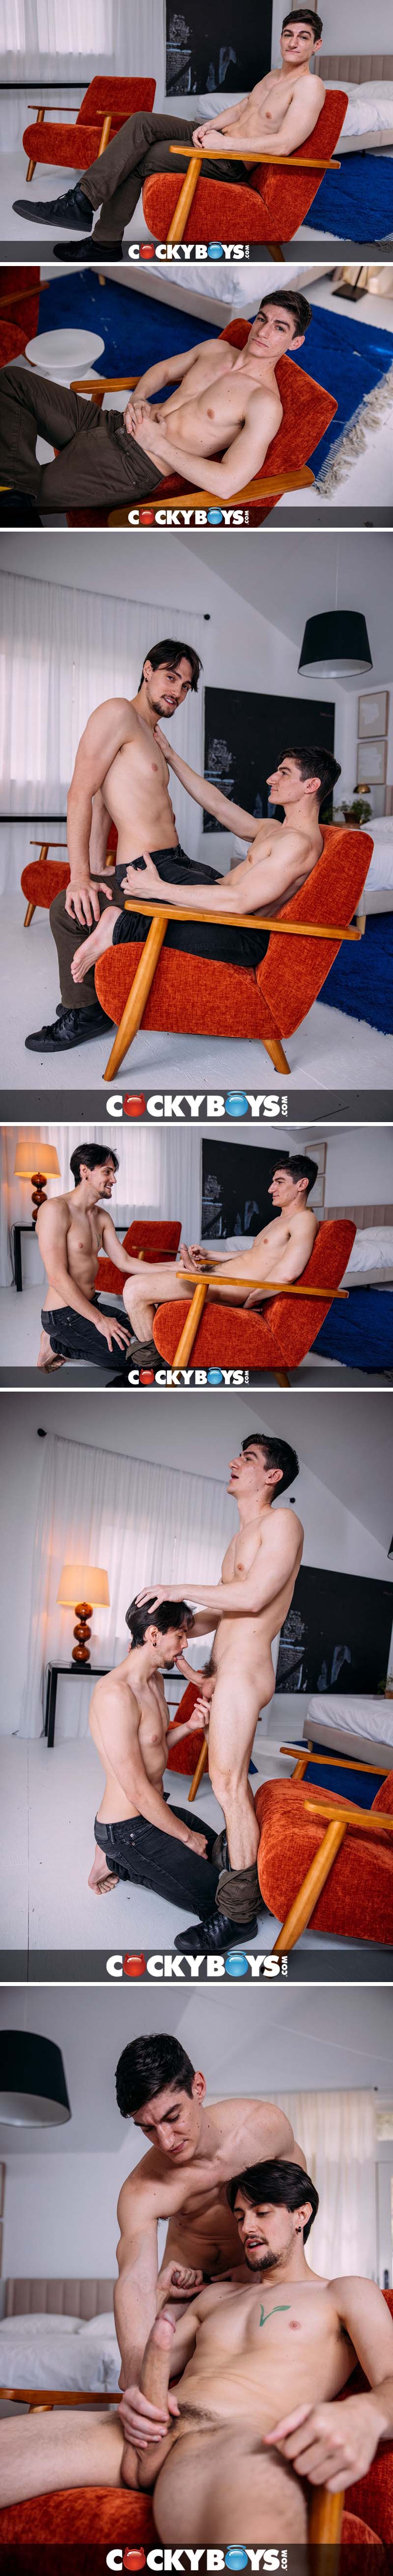 Collin Merp’s First Bottom Experience with Aiden Ward at CockyBoys